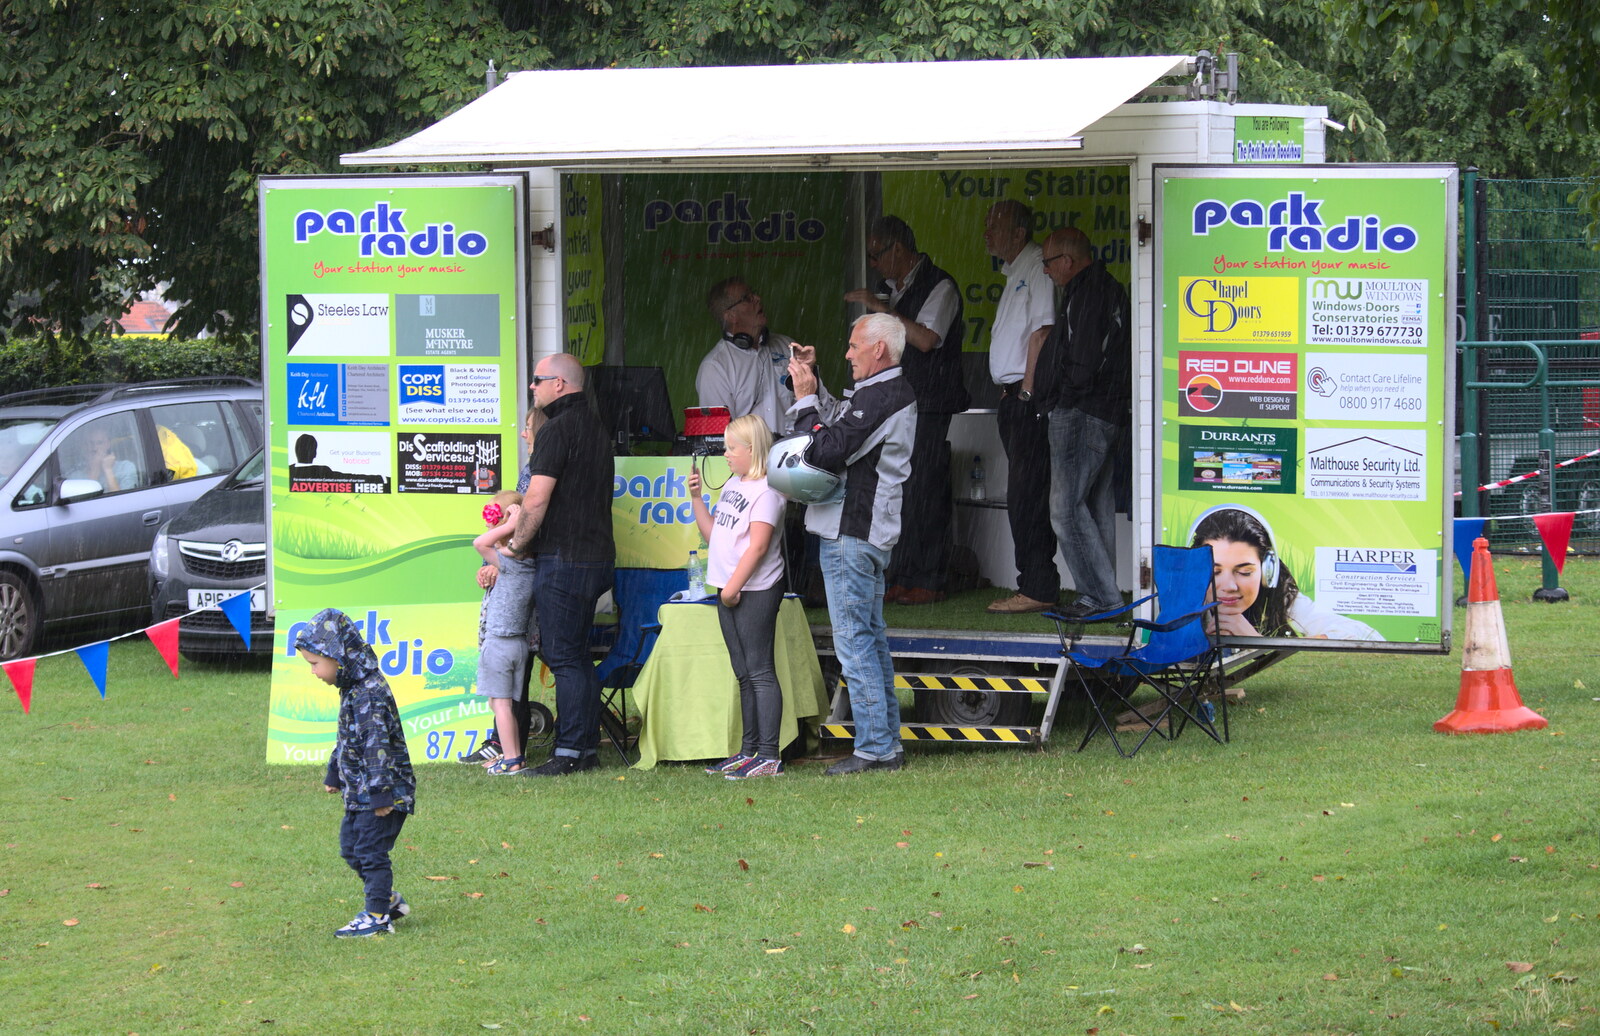 Park Radio's mobile trailer from Diss Fest, or Singin' in the Rain, Diss, Norfolk - 23rd July 2017